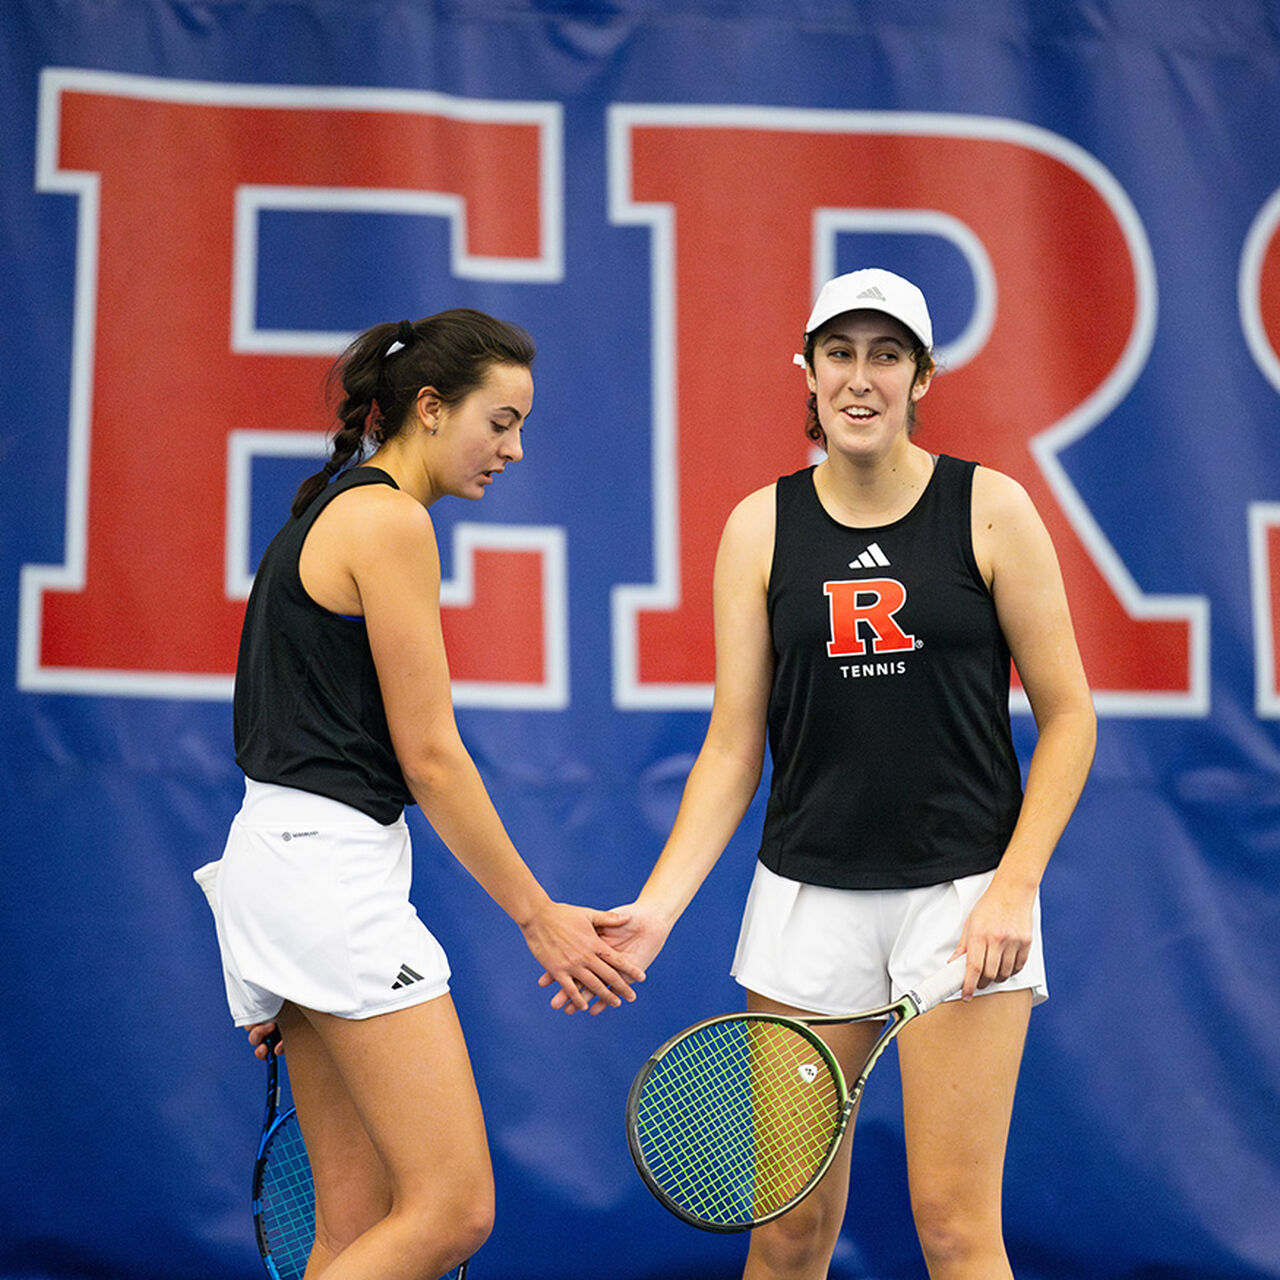 Two Rutgers Women's Tennis players image number 0